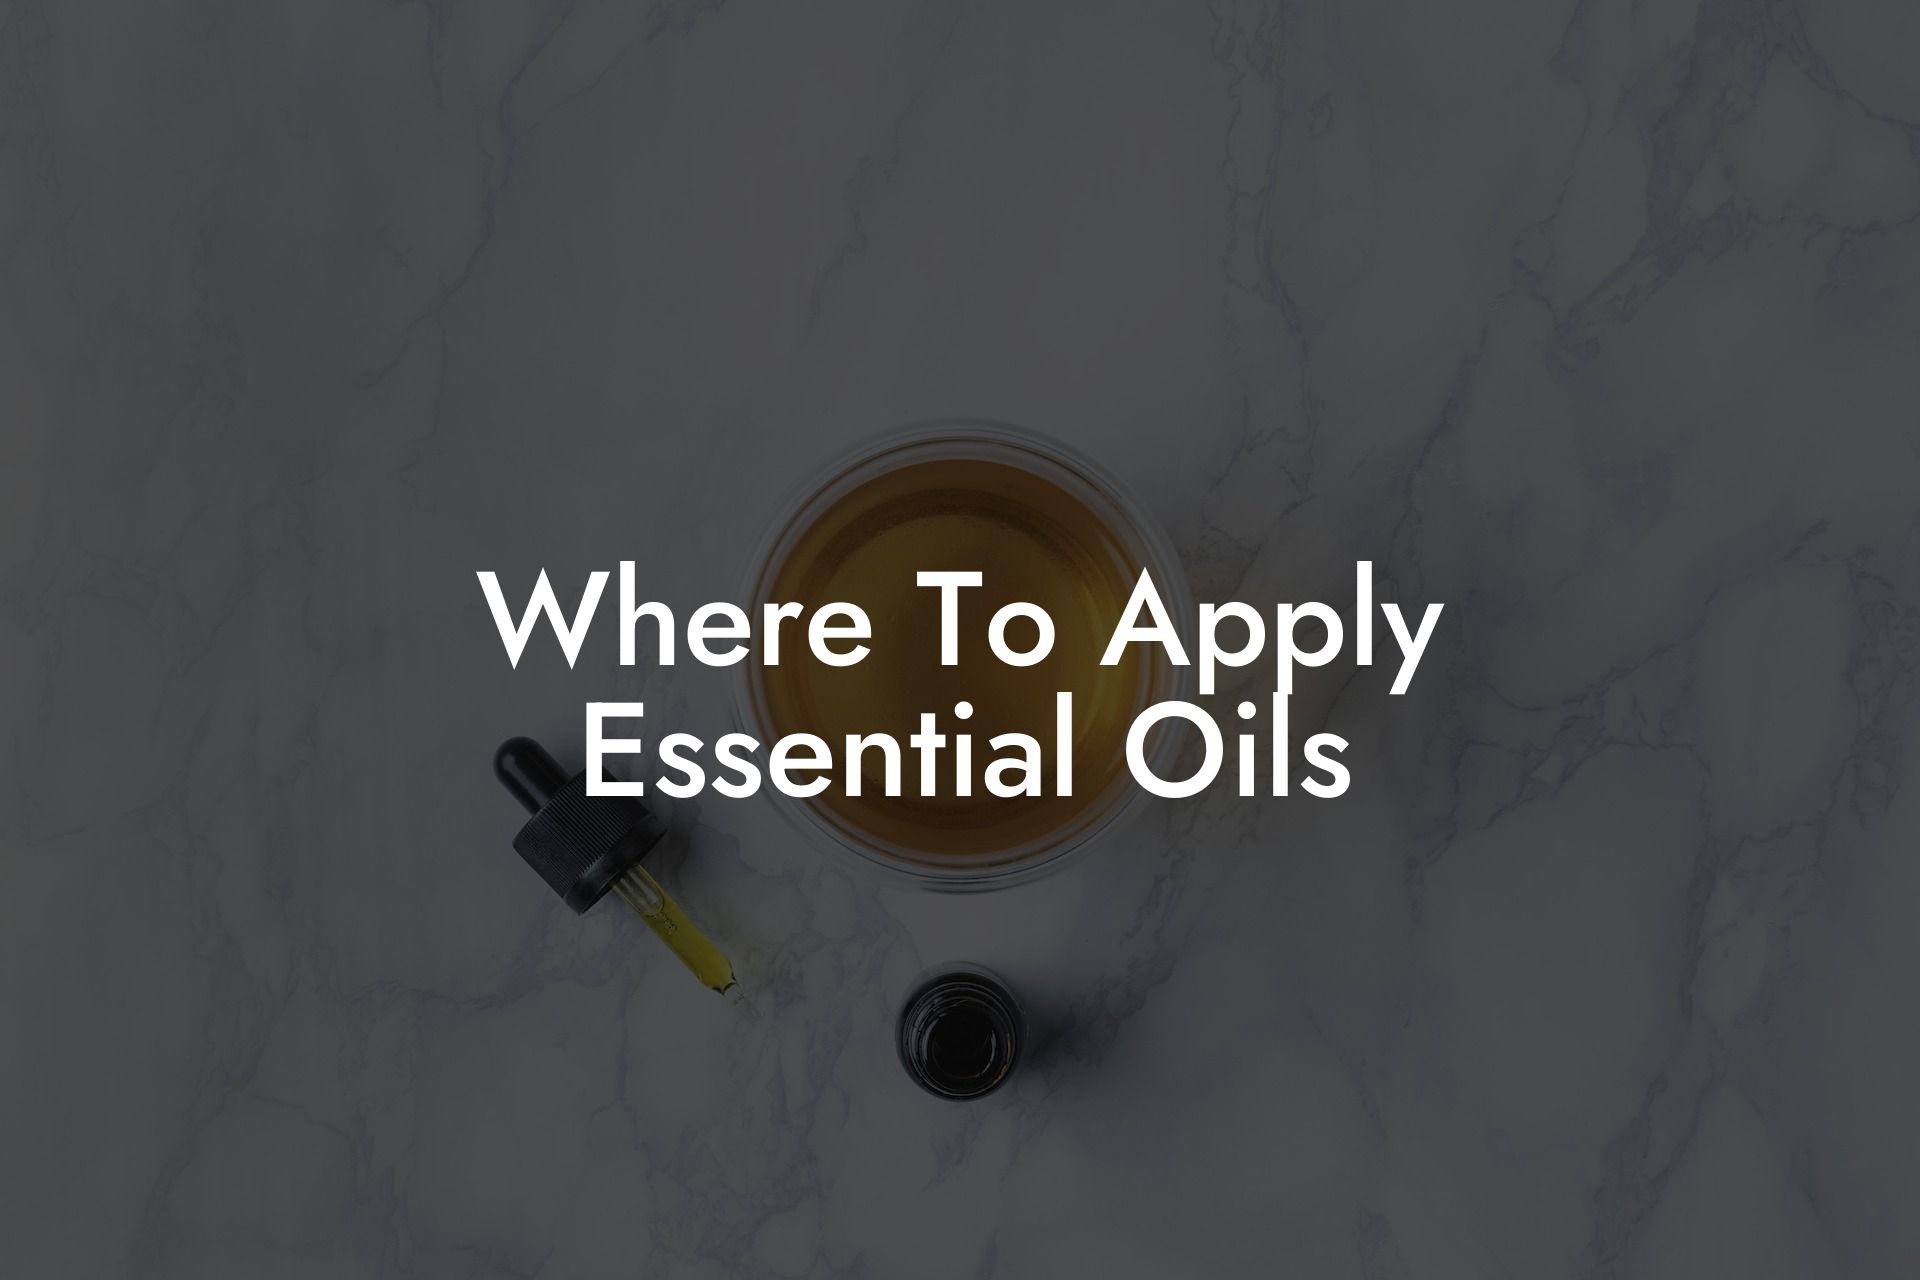 Where To Apply Essential Oils